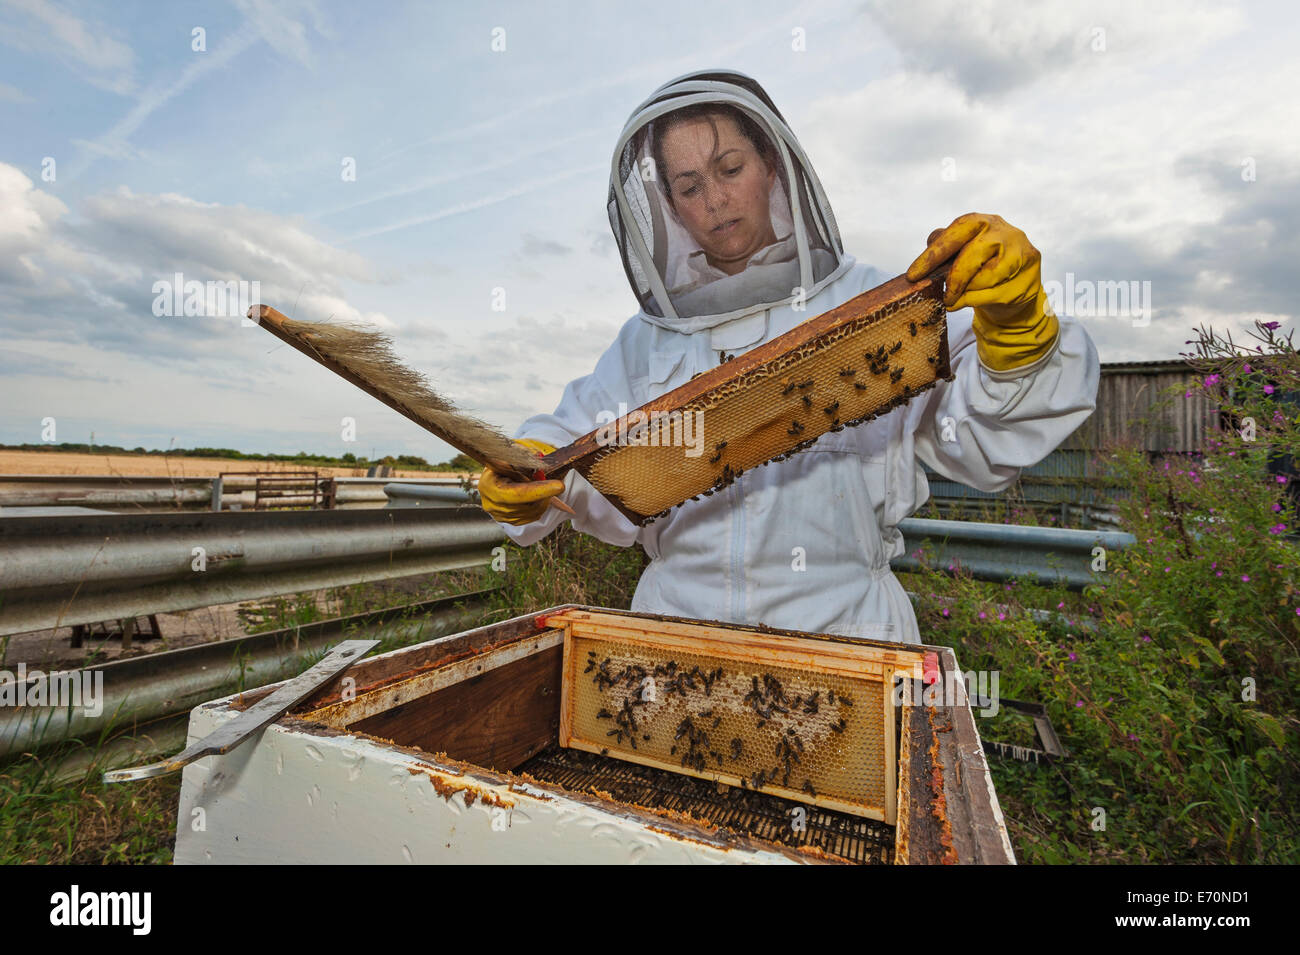 A woman beekeeper checking the honey frames of her beehive to see what the year's production has been like. Stock Photo